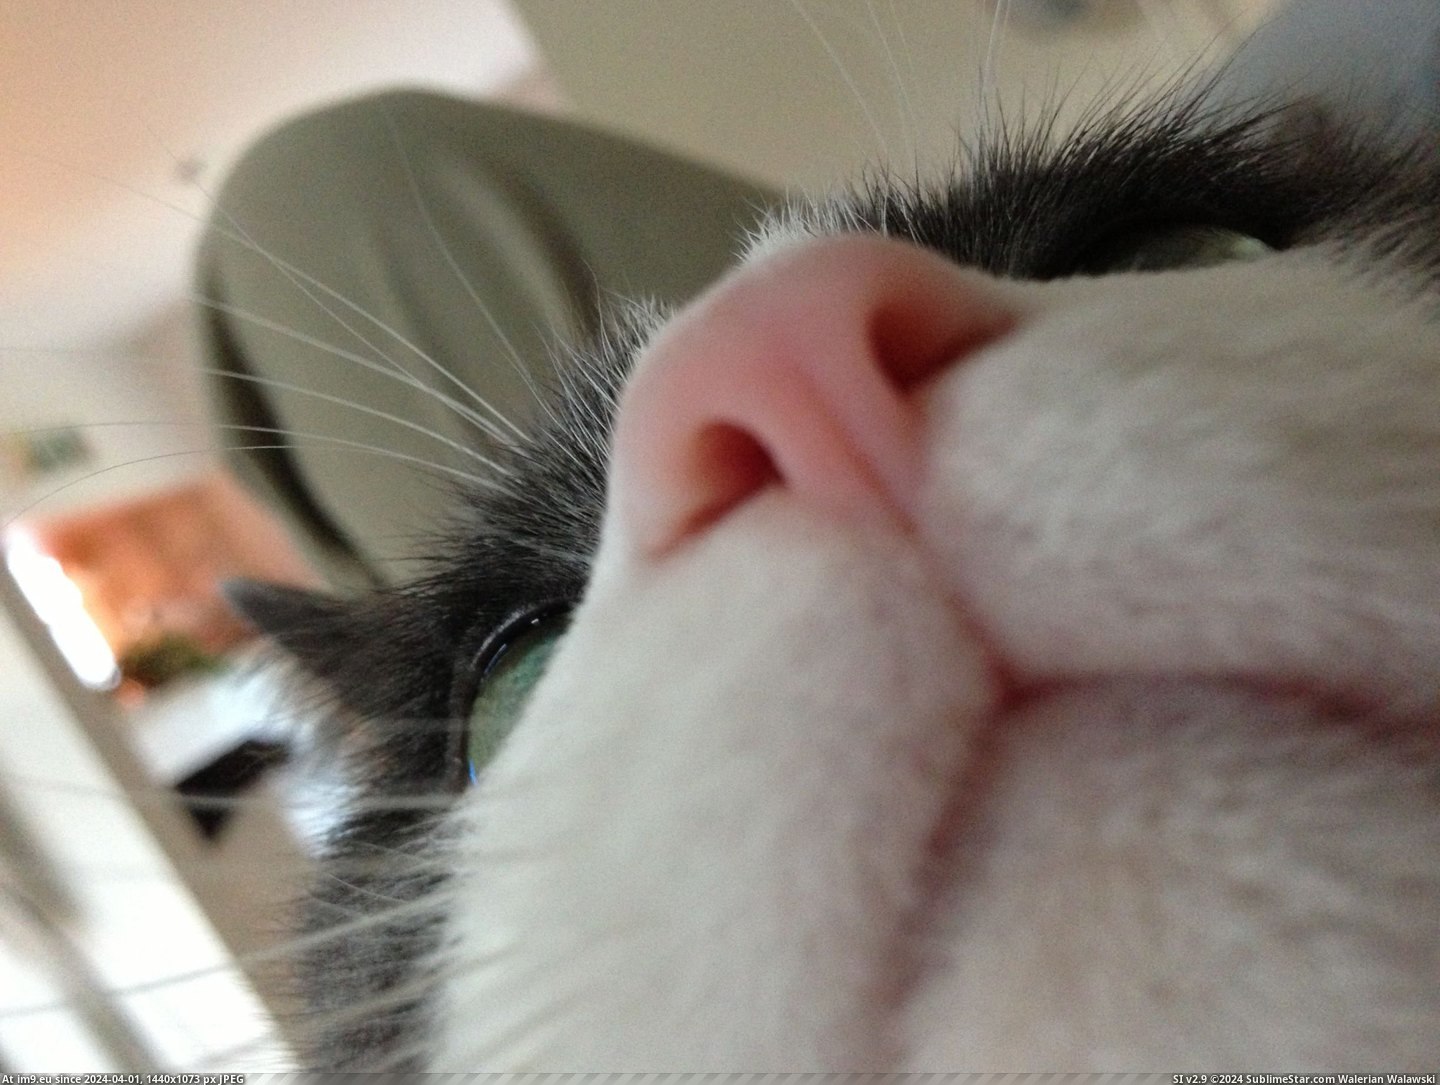 #Cats #Hooman #Nose [Cats] Look at my nose, hooman. Pic. (Изображение из альбом My r/CATS favs))